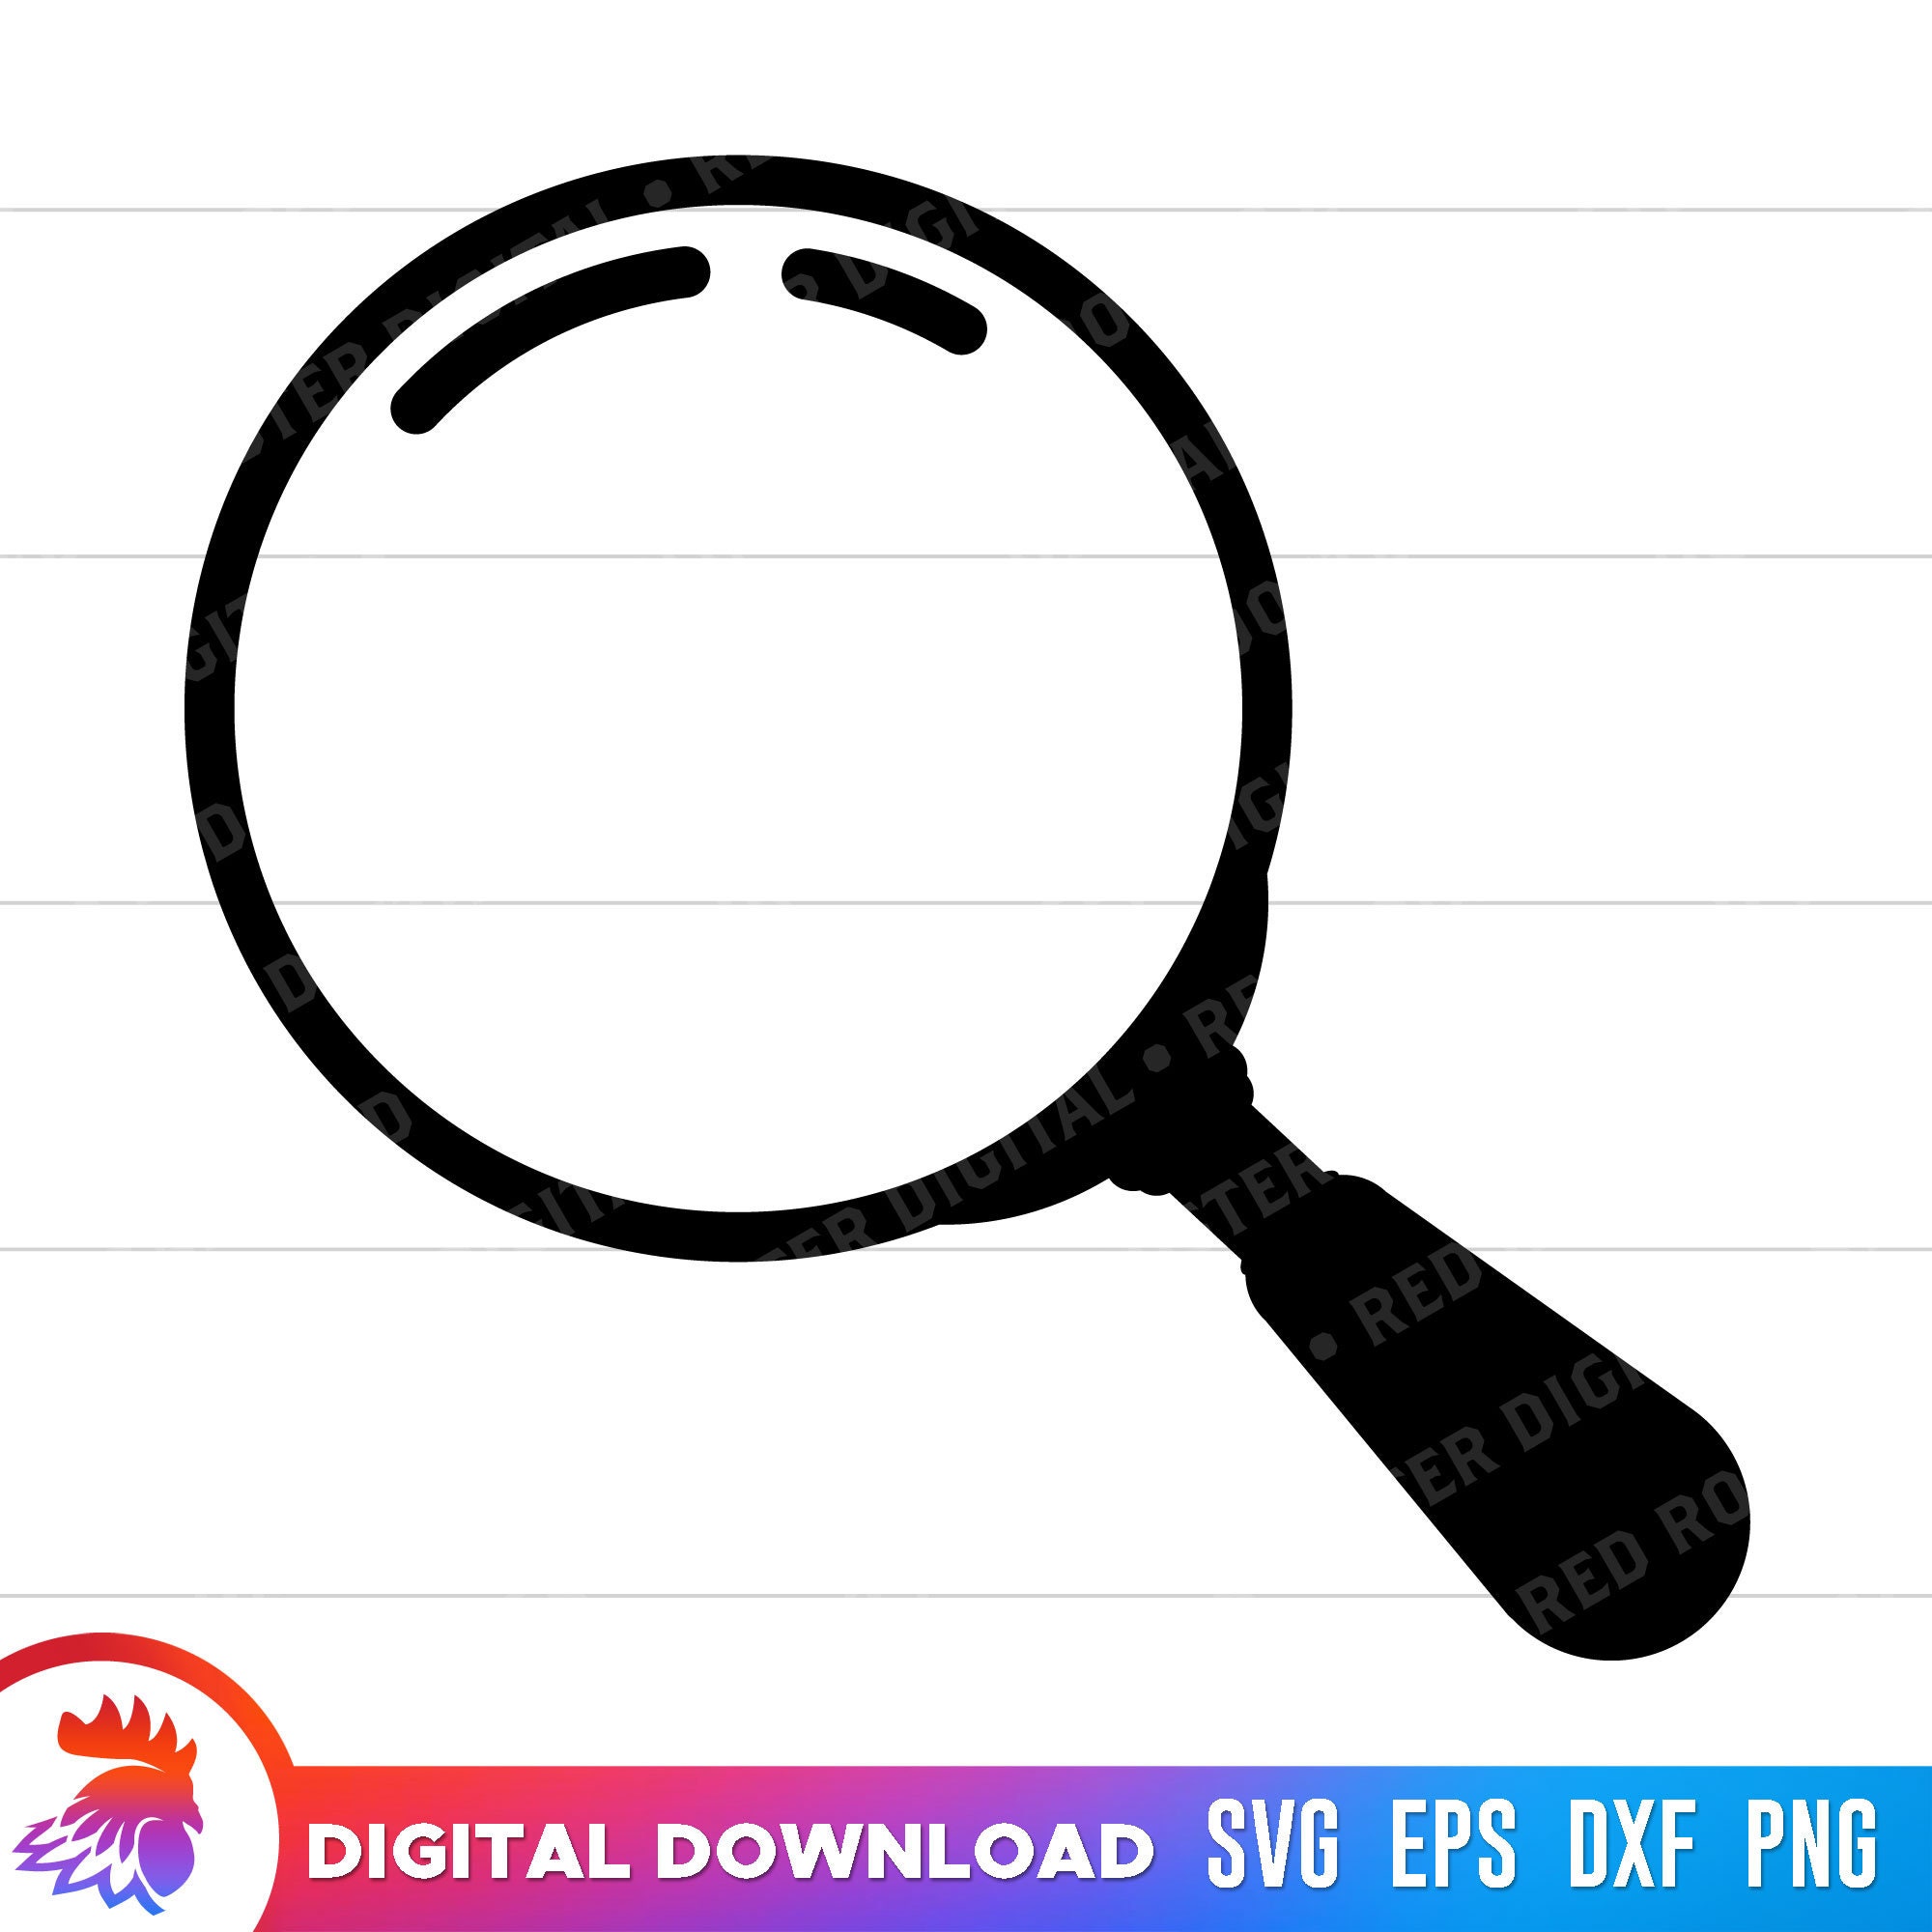 Magnifying Glass Svg Clipart image, Cricut Svg image, Dxf, Pdf, Eps, Jpg,  Png, Svg, Silhouette, Cameo, Design